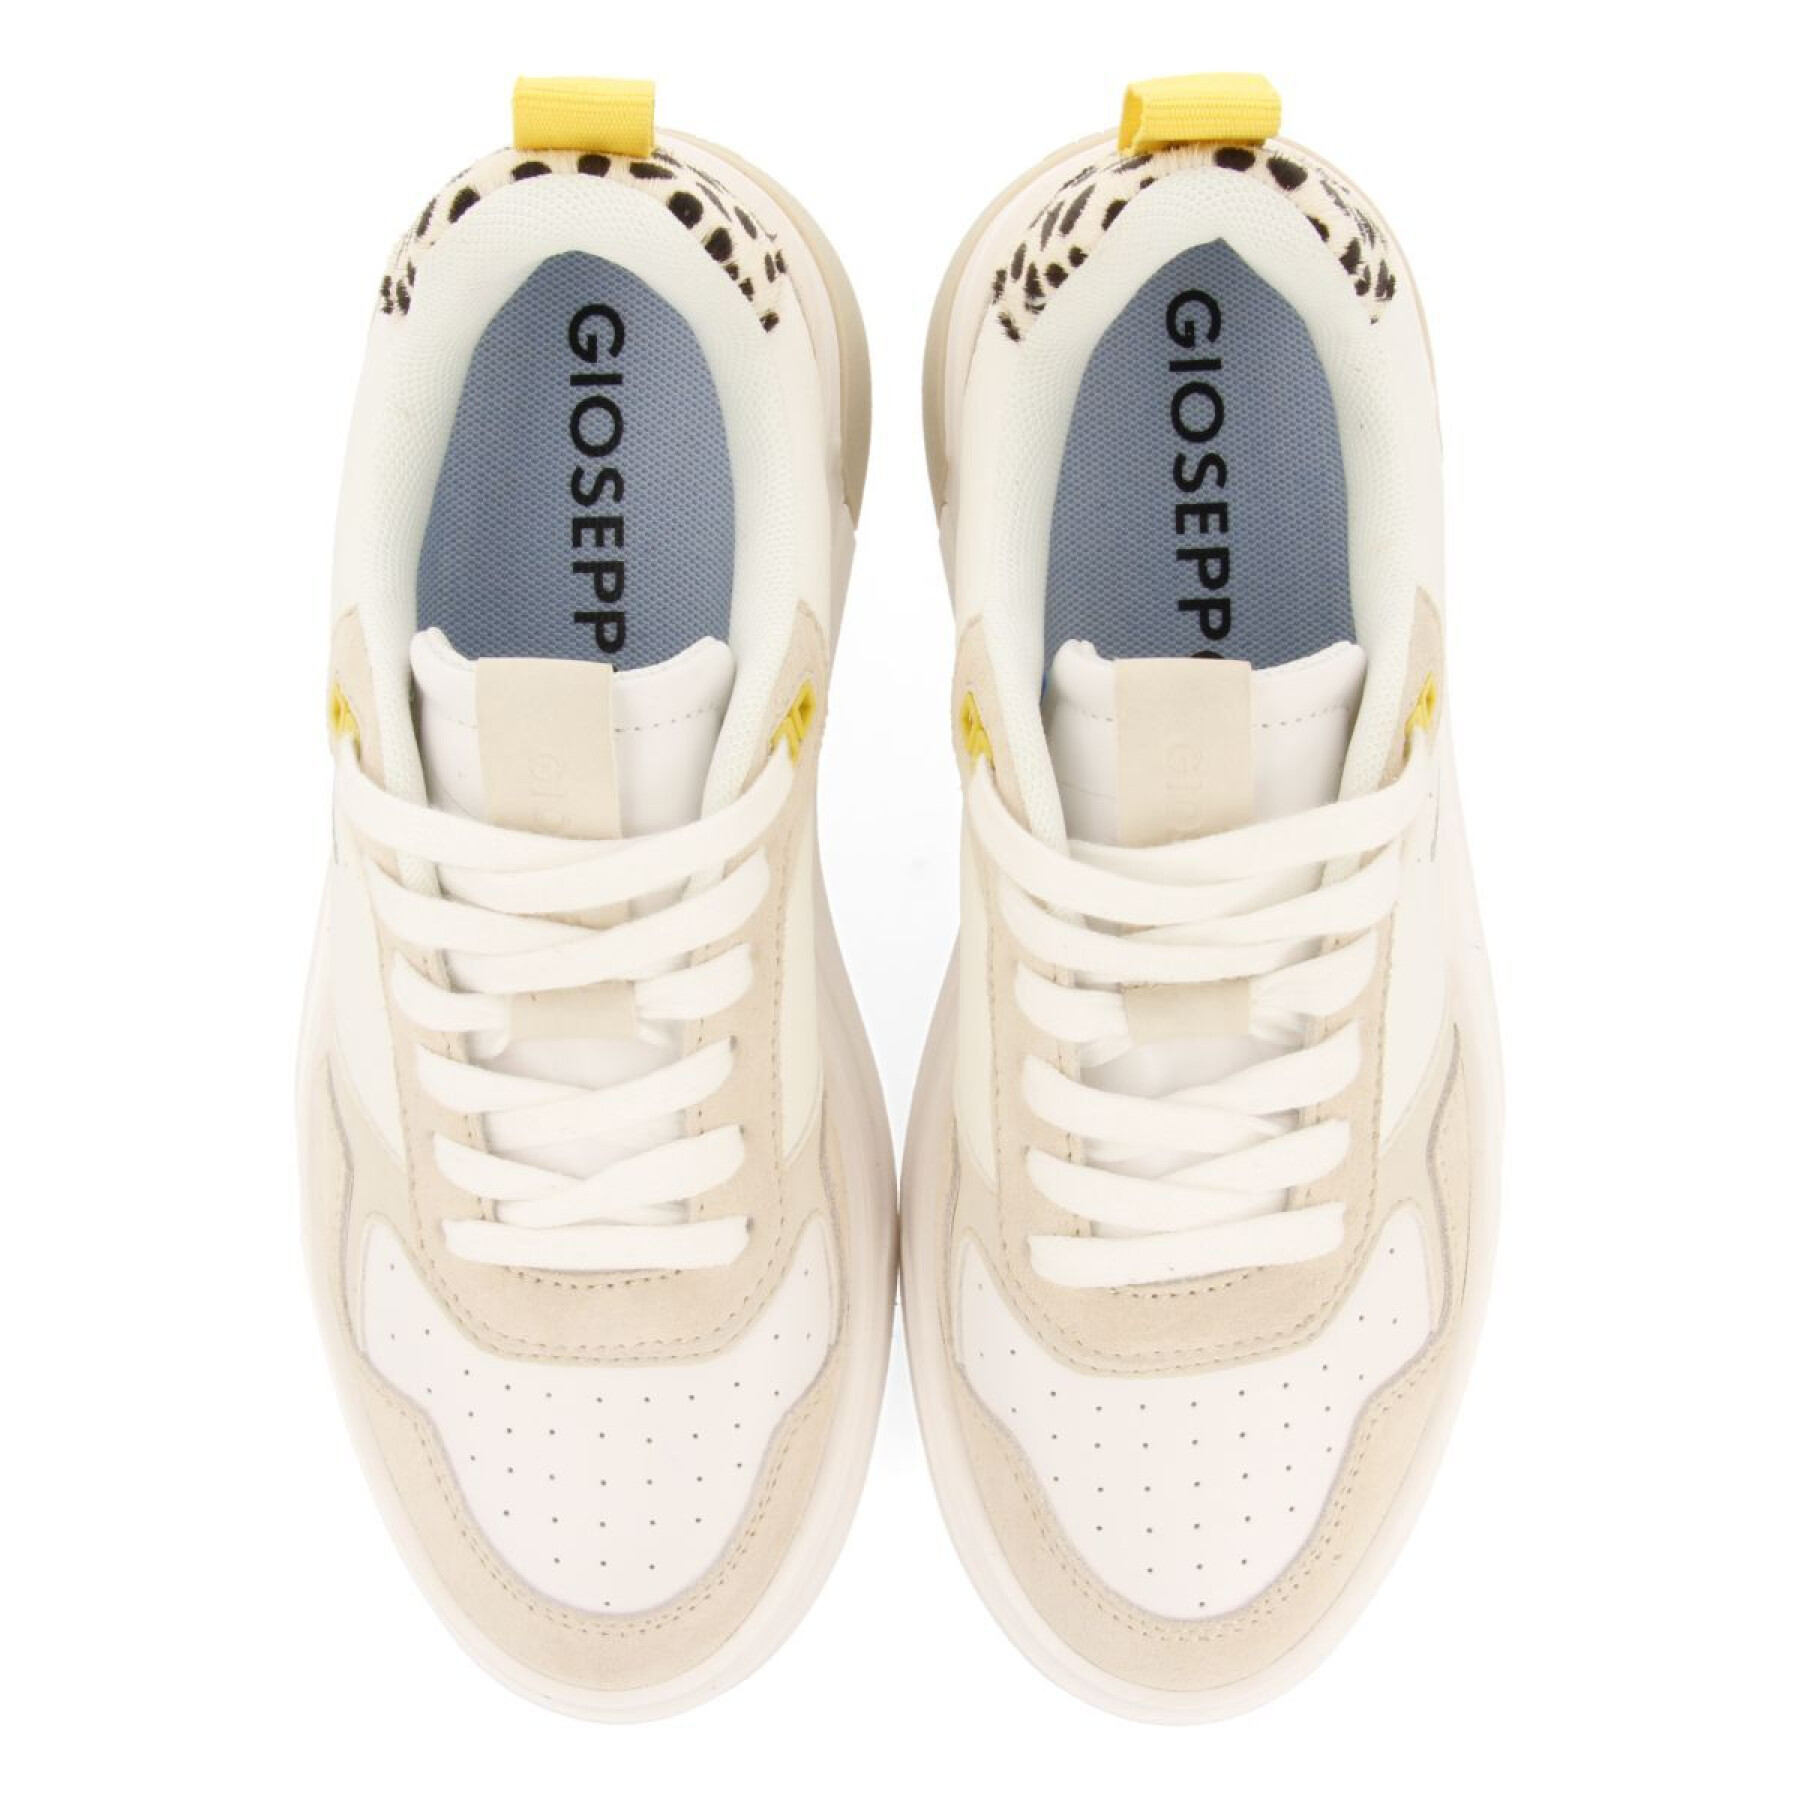 Women's sneakers Gioseppo Penwith